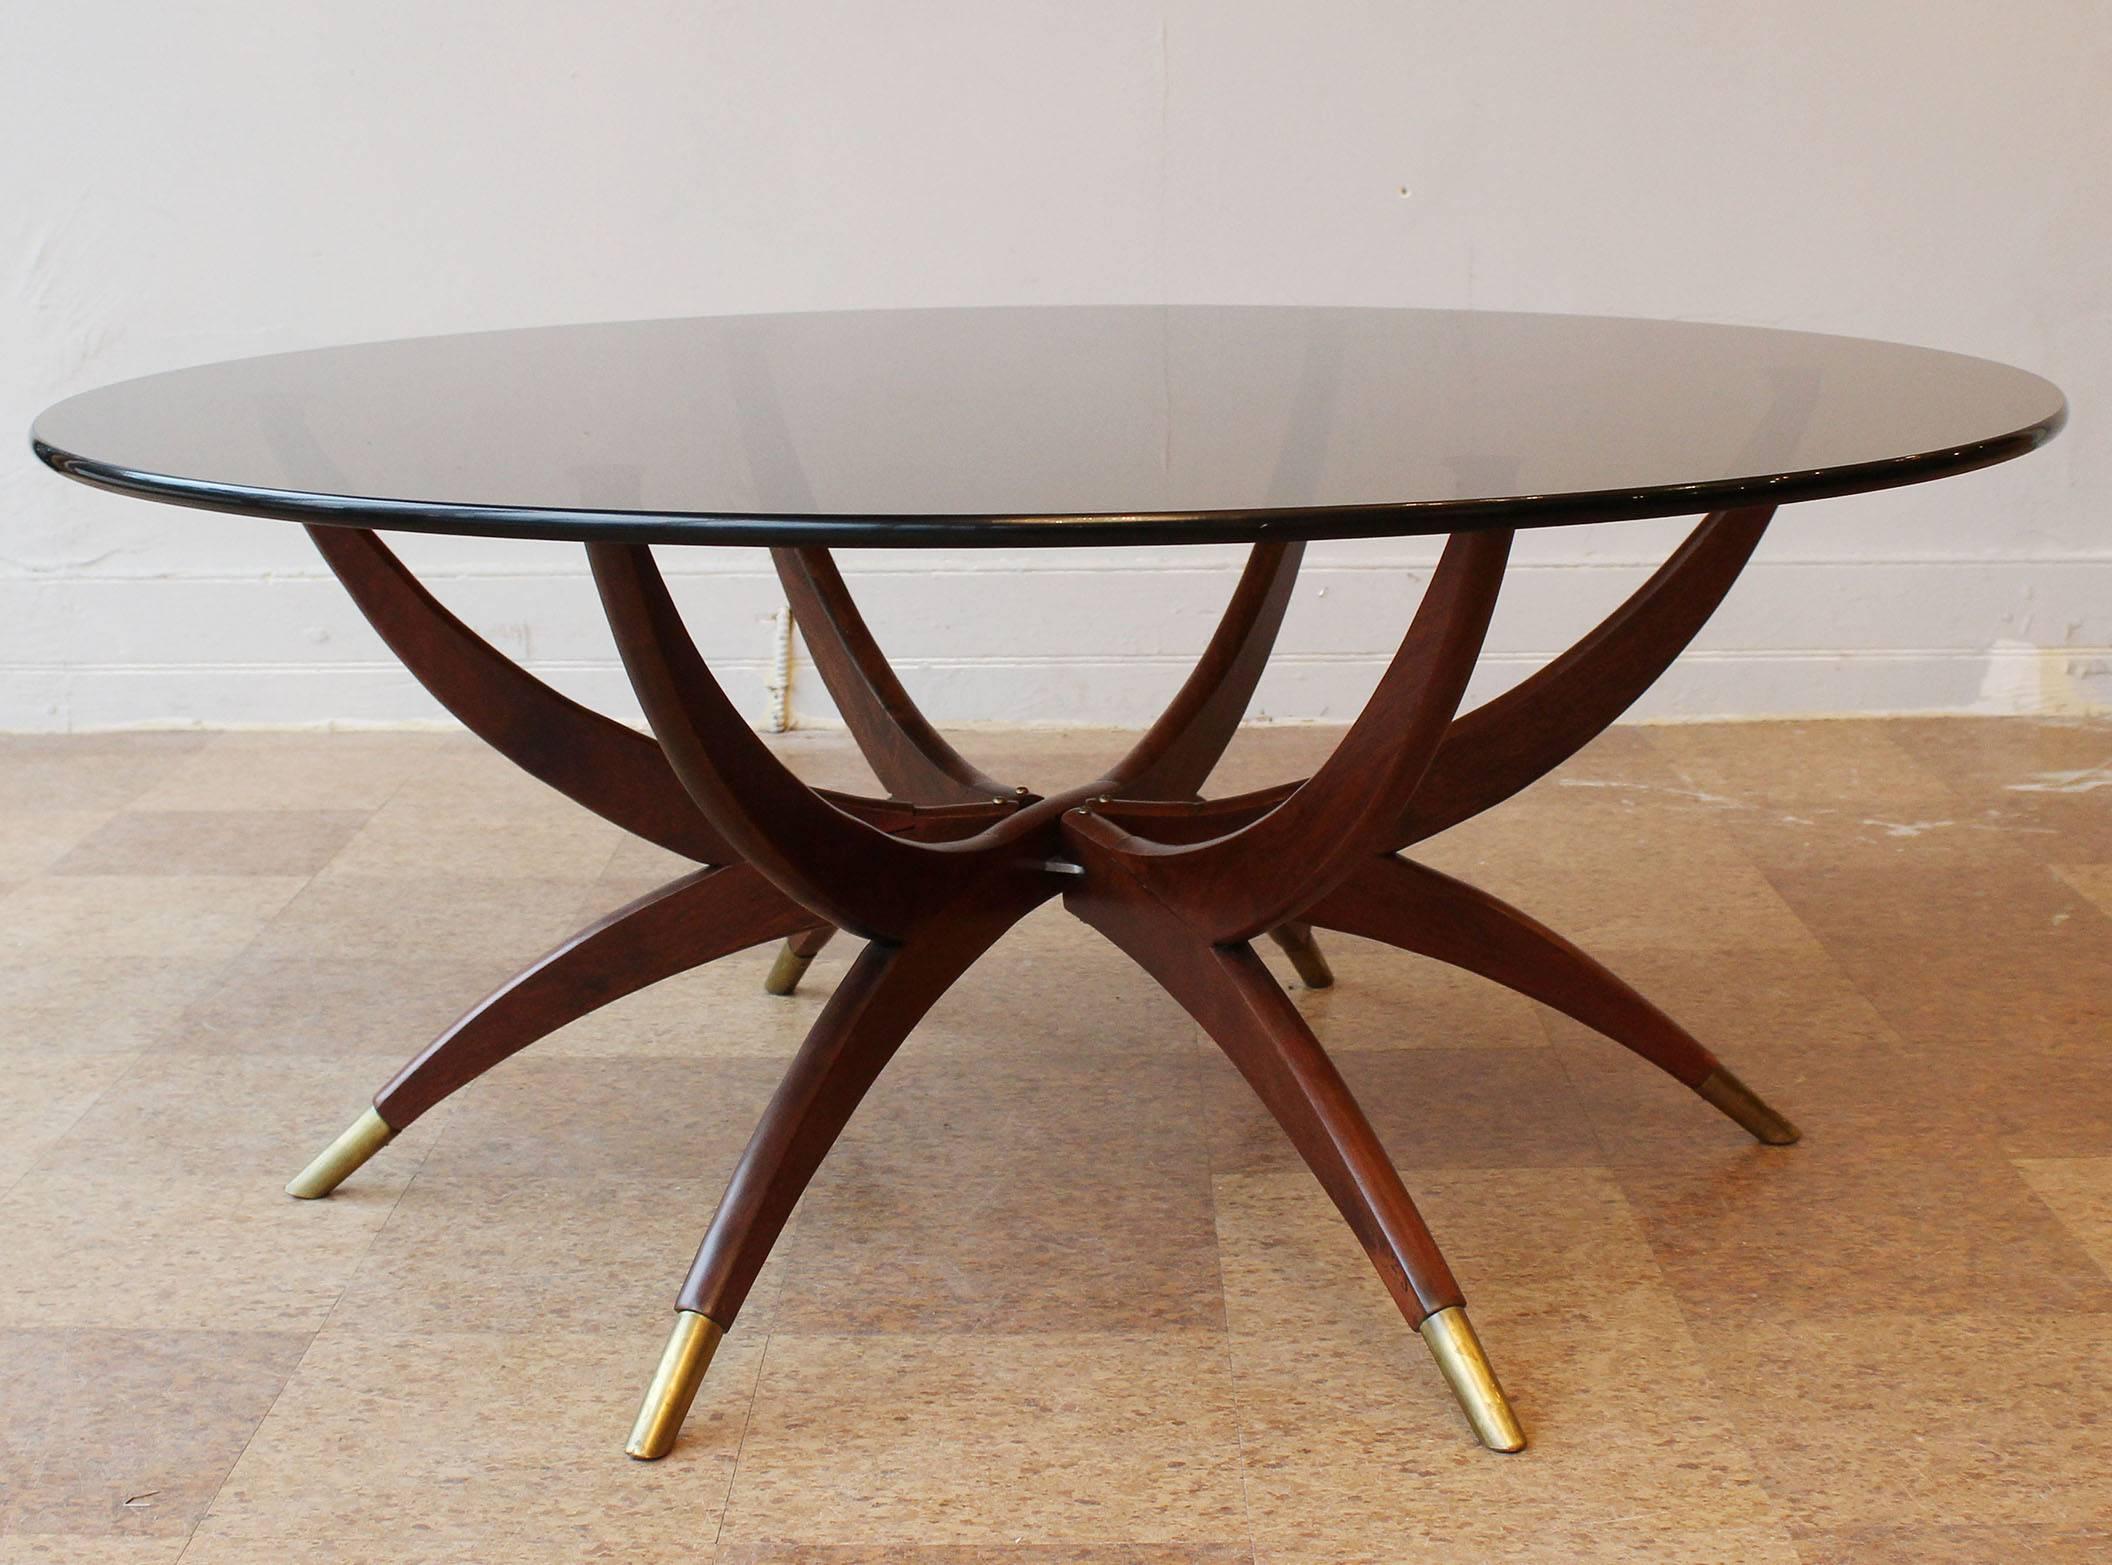 An Italian collapsible wood frame coffee table with brass sabots in the manner of Carlo de Carli.

Collapses to 34